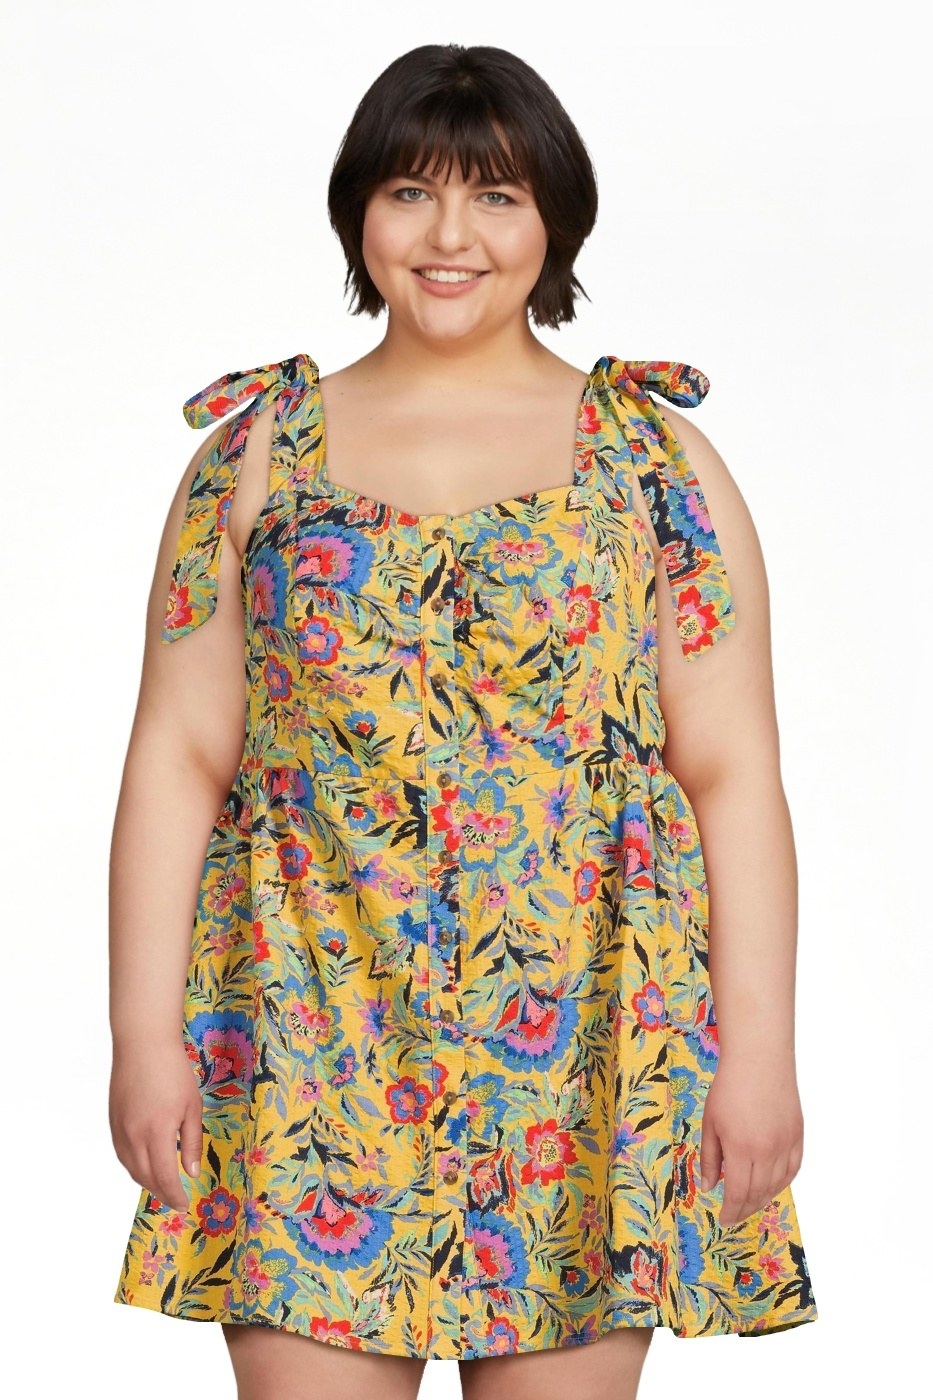 a model wearing the yellow floral dress